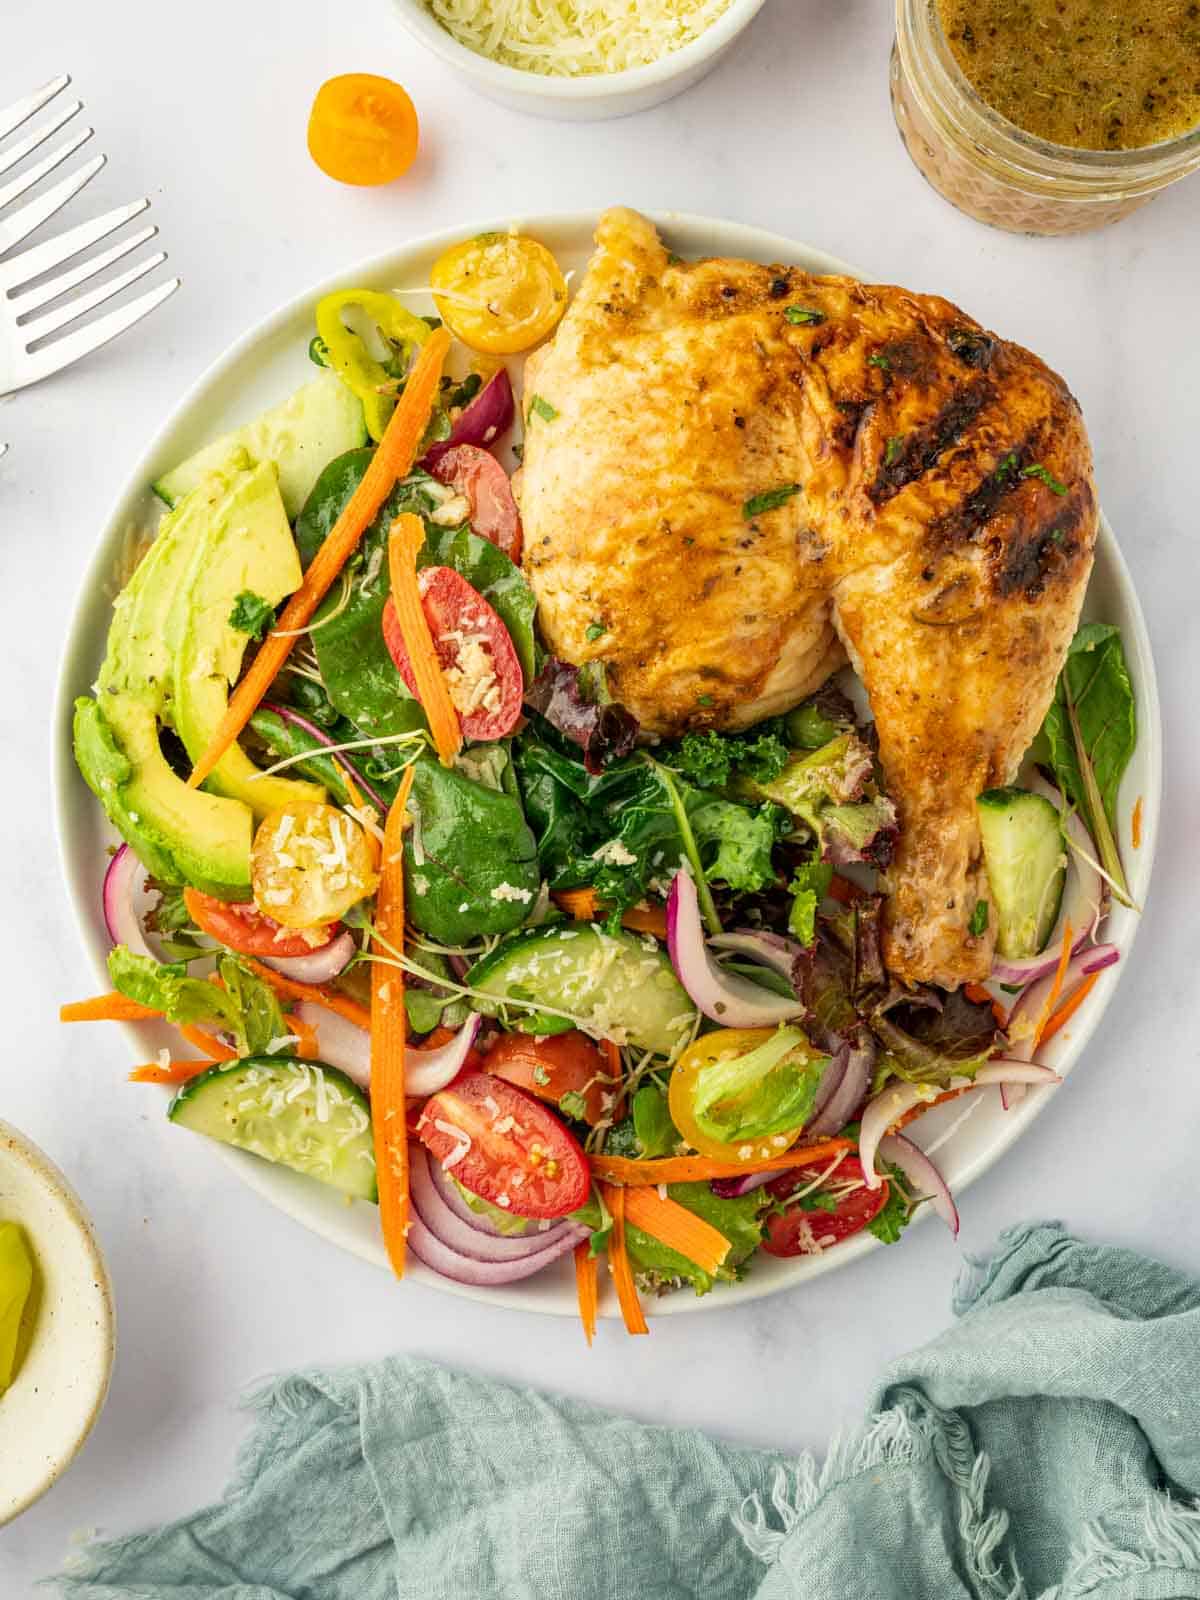 Traditional house salad served with chicken on a plate.